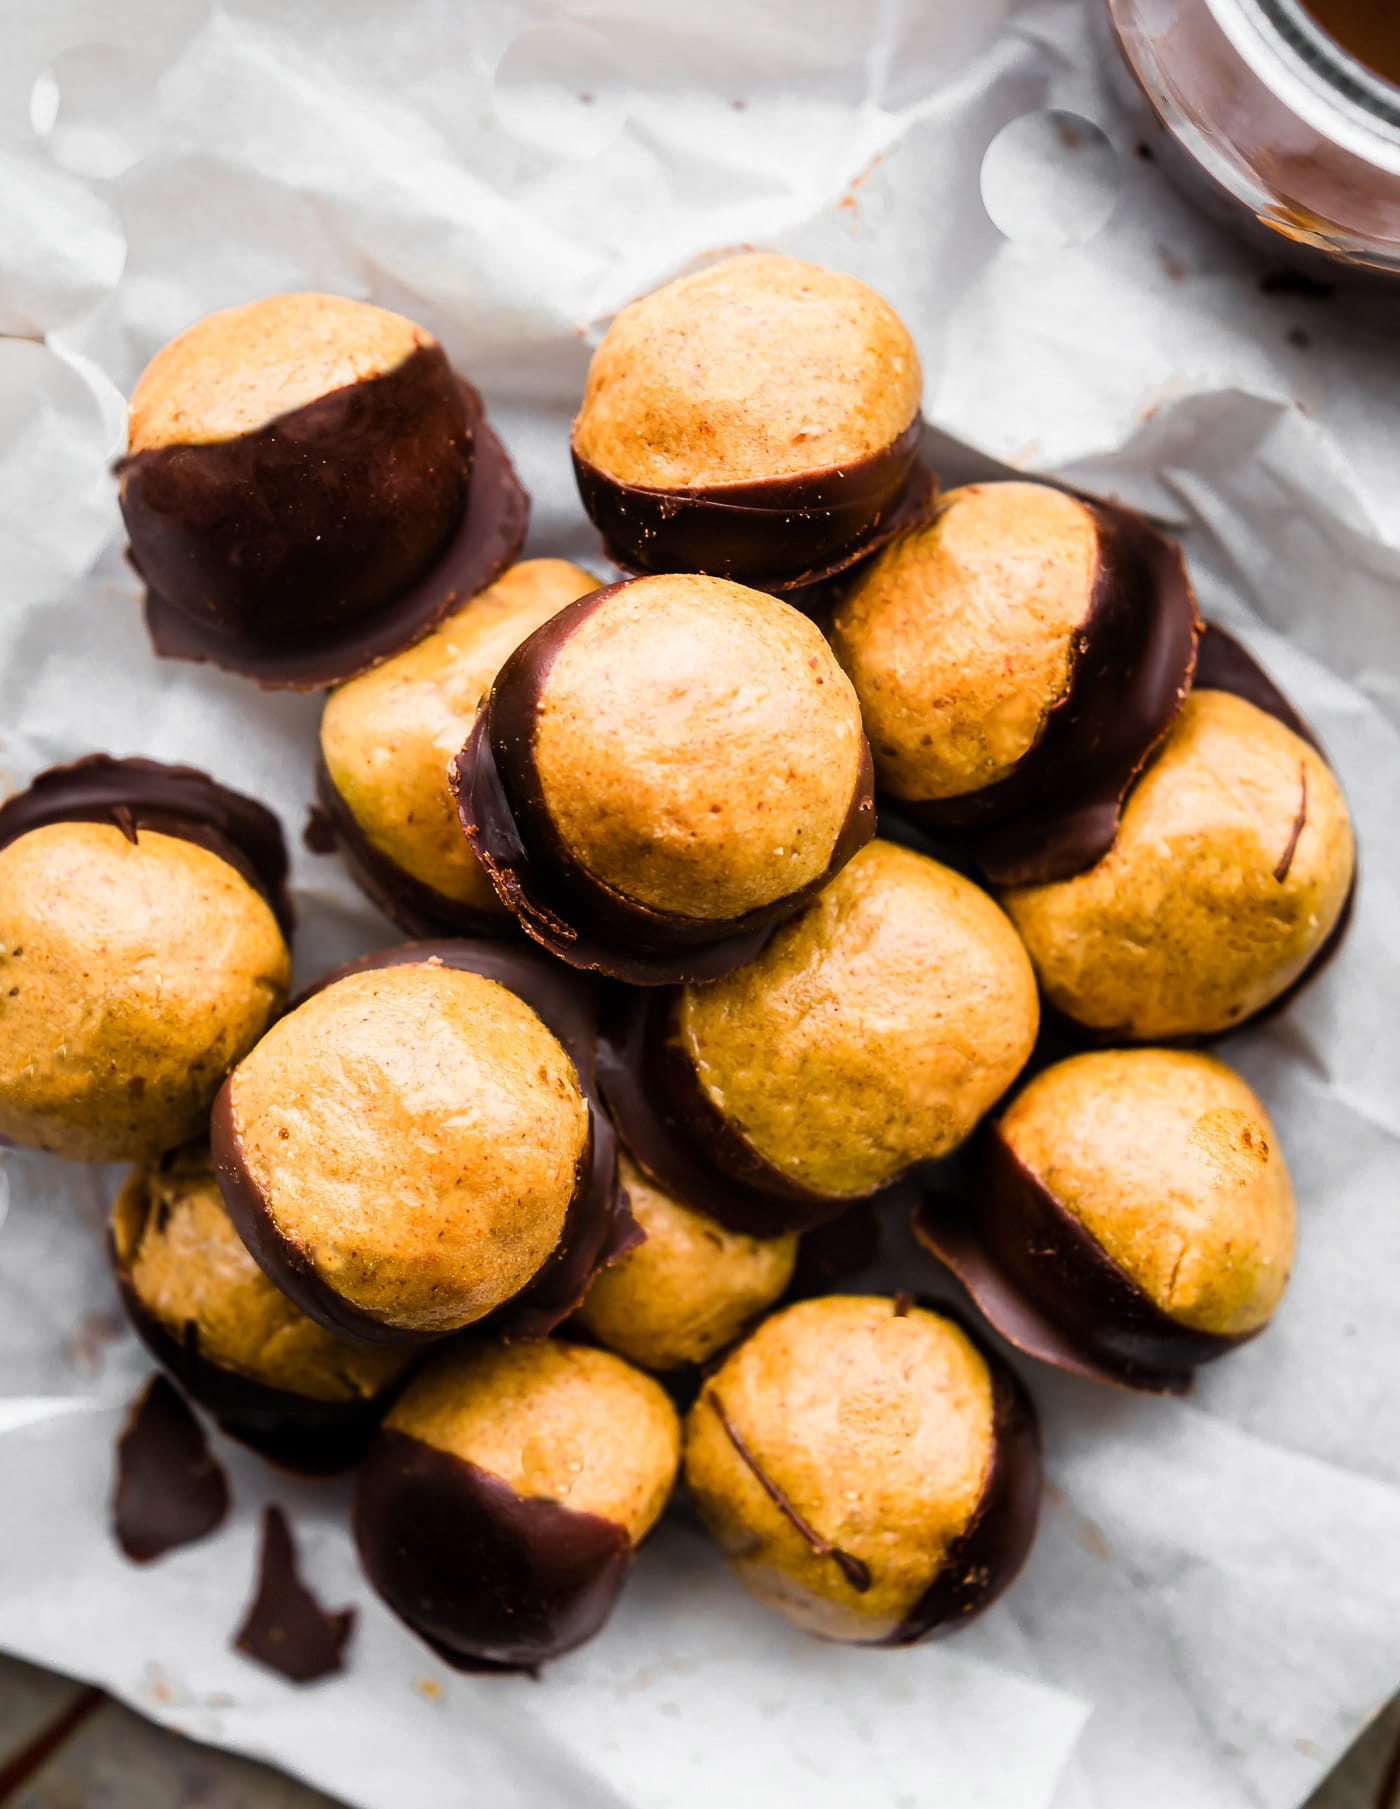 A Buckeyes Recipe Packed with Protein! These Vegan Peanut Butter Protein Buckeyes are super easy to make and coated in dairy free dark chocolate. Gluten free with a Paleo option. A classic Buckeyes Recipe with a healthy boost! No baking required so make as many as you can, mmm k?